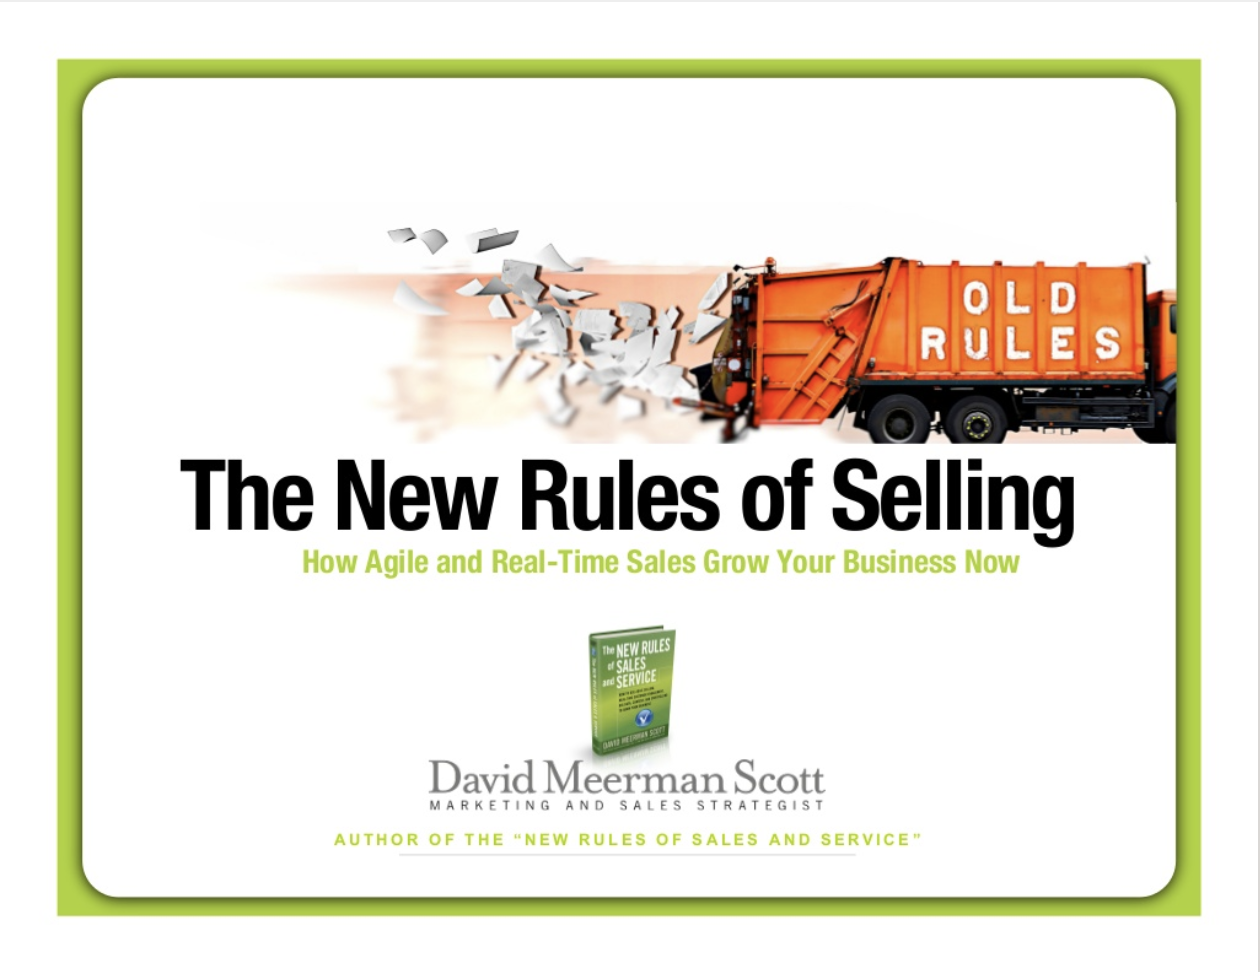 The New Rules of Selling